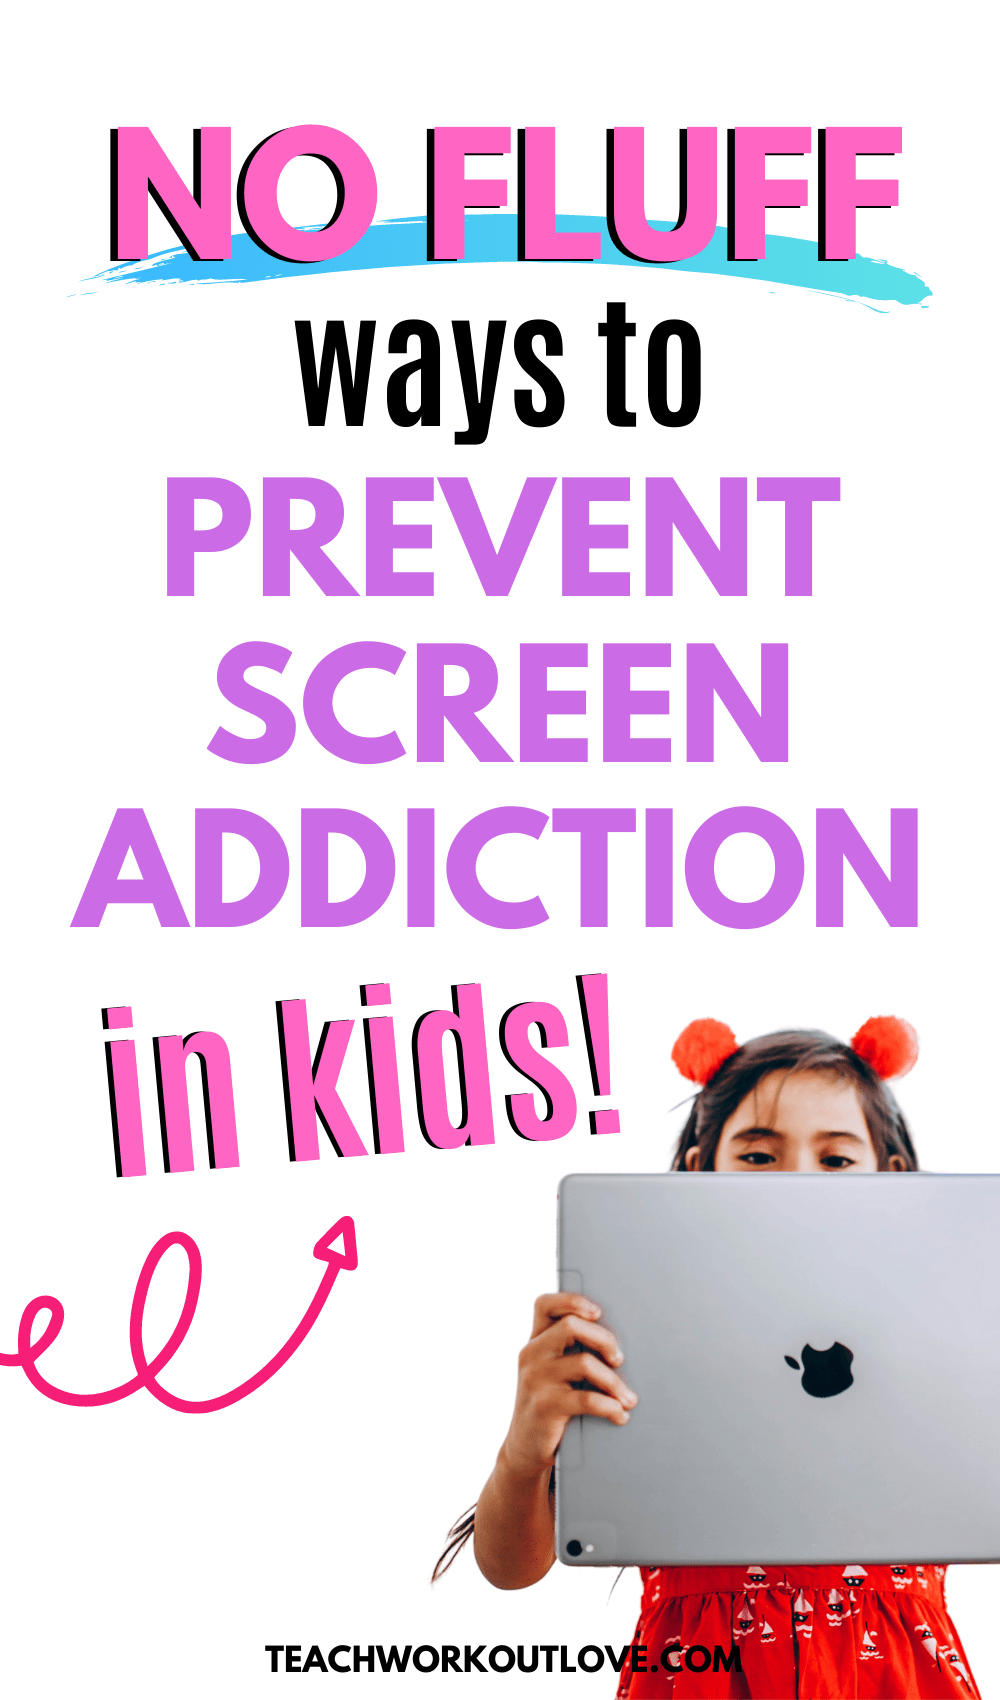 It can be frustrating as a parent to see your kids on technology all the time. Look at these three simple ways to tear your kids away from their screens.